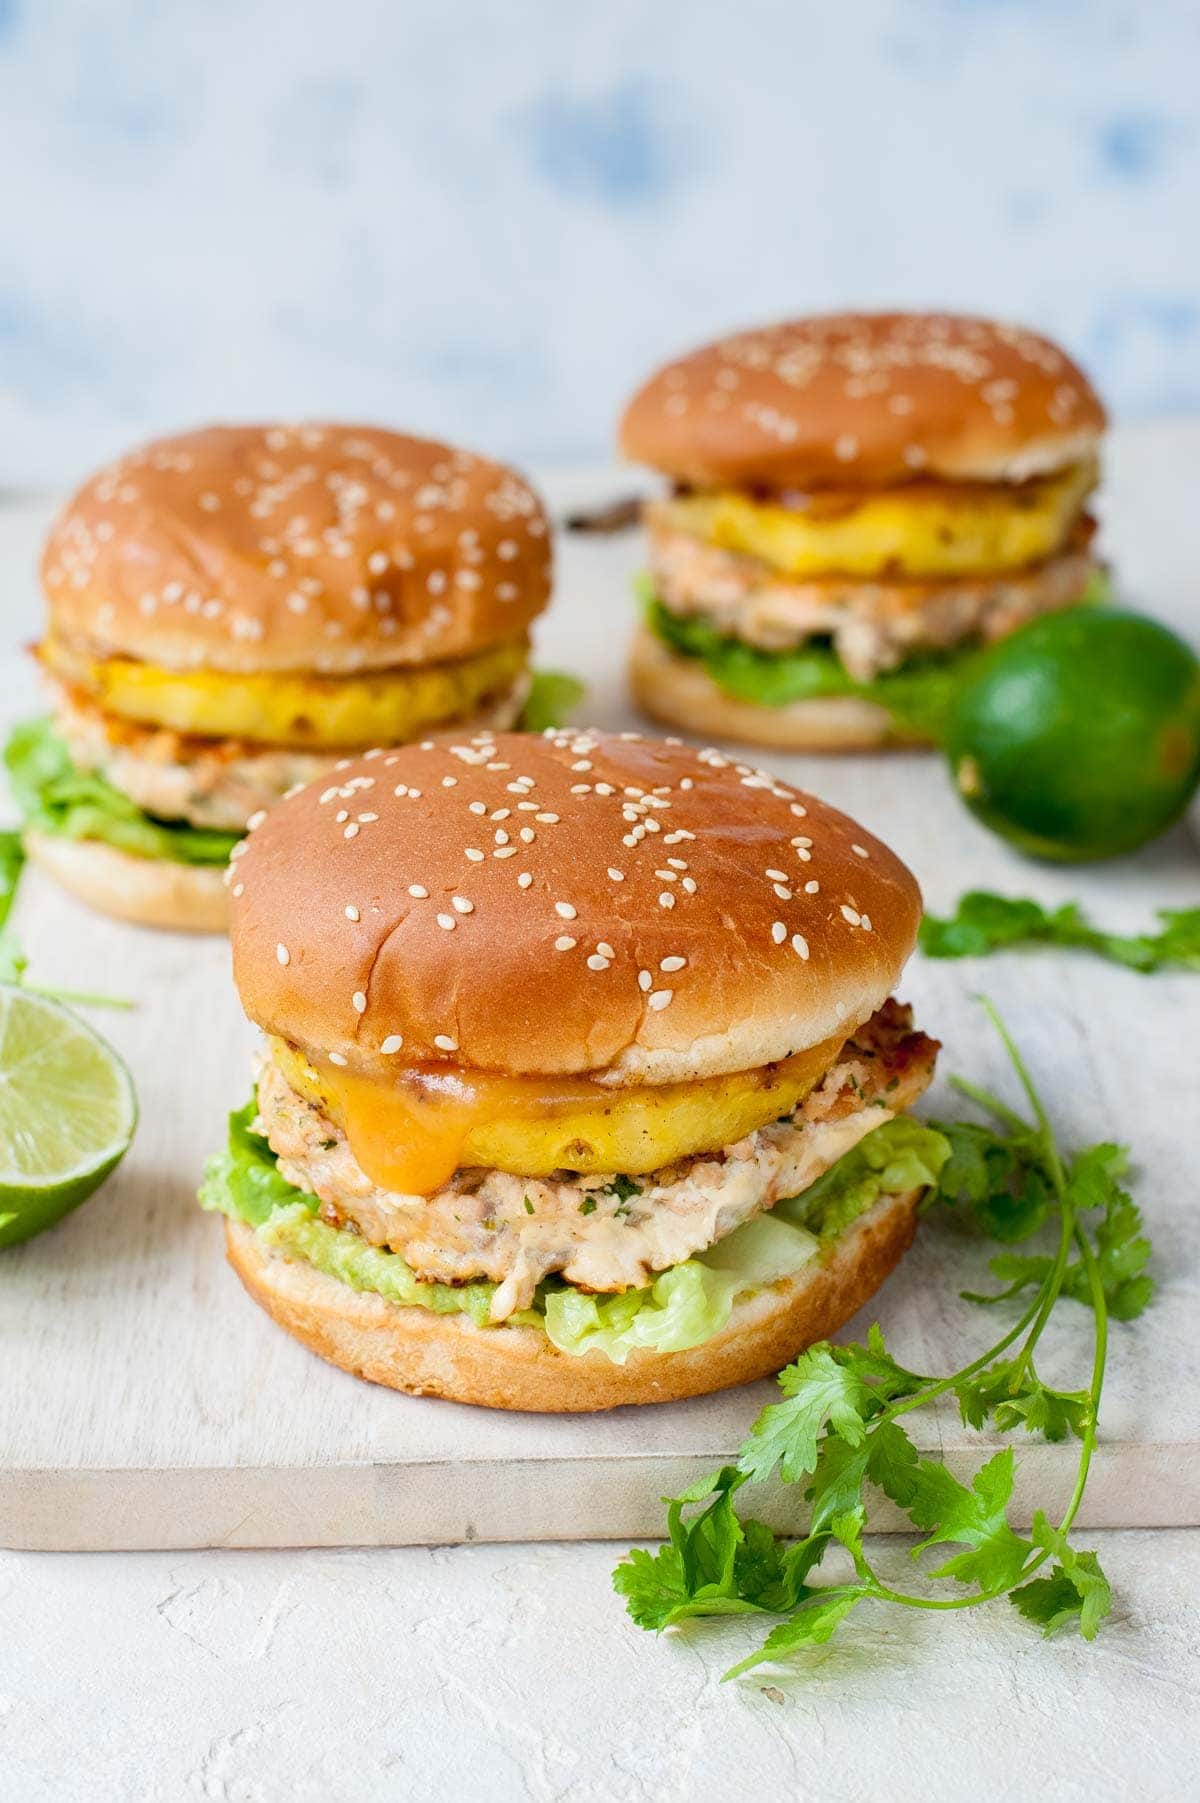 Salmon burgers with pineapple and guacamole - Everyday Delicious